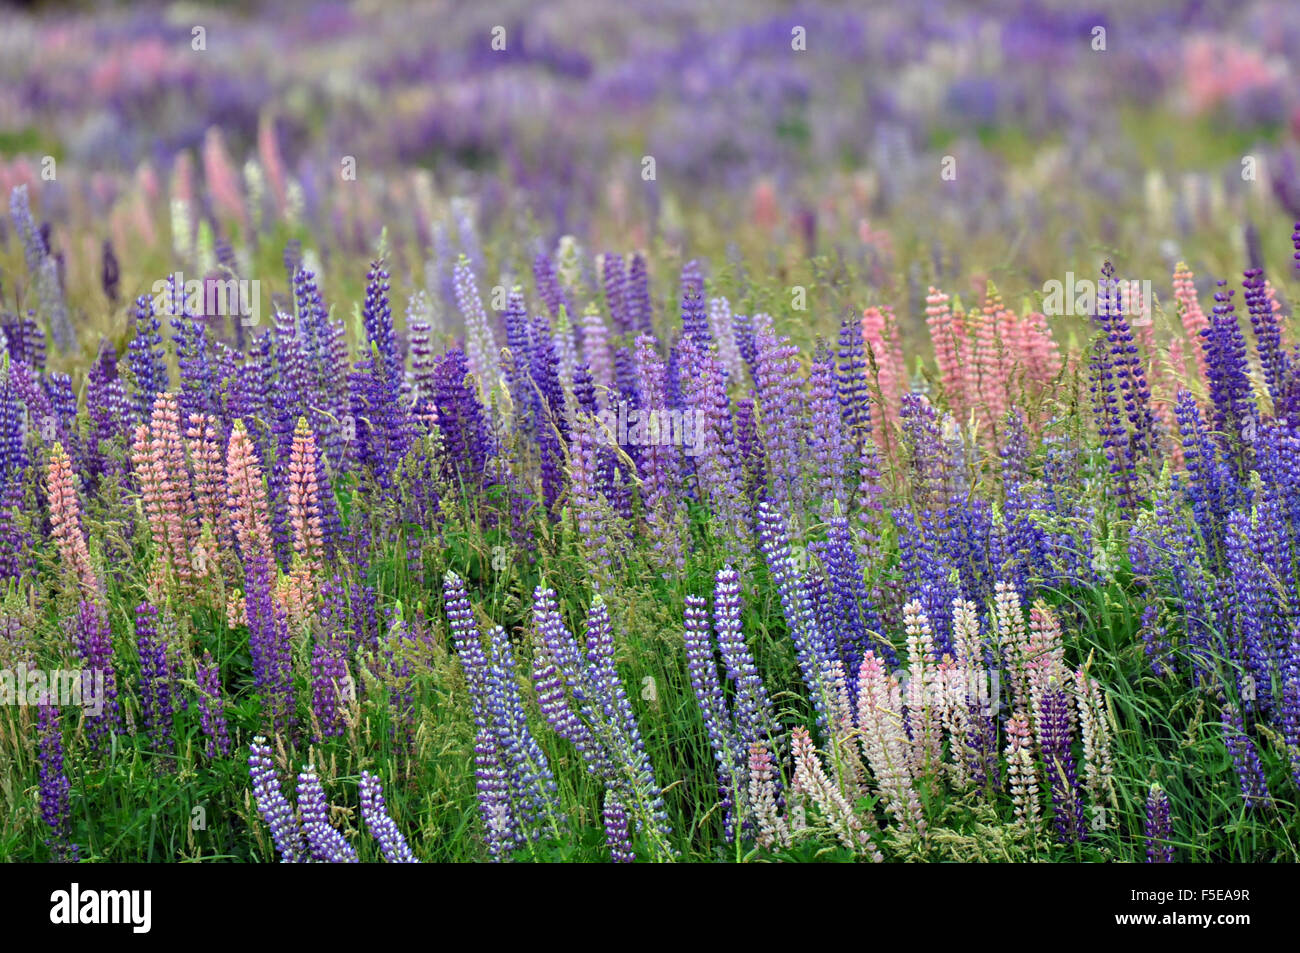 Flowering lupines, Lupinus polyphyllus, along Milford road, Te-Anau, Fiordland National Park, South Island, New Zealand Stock Photo